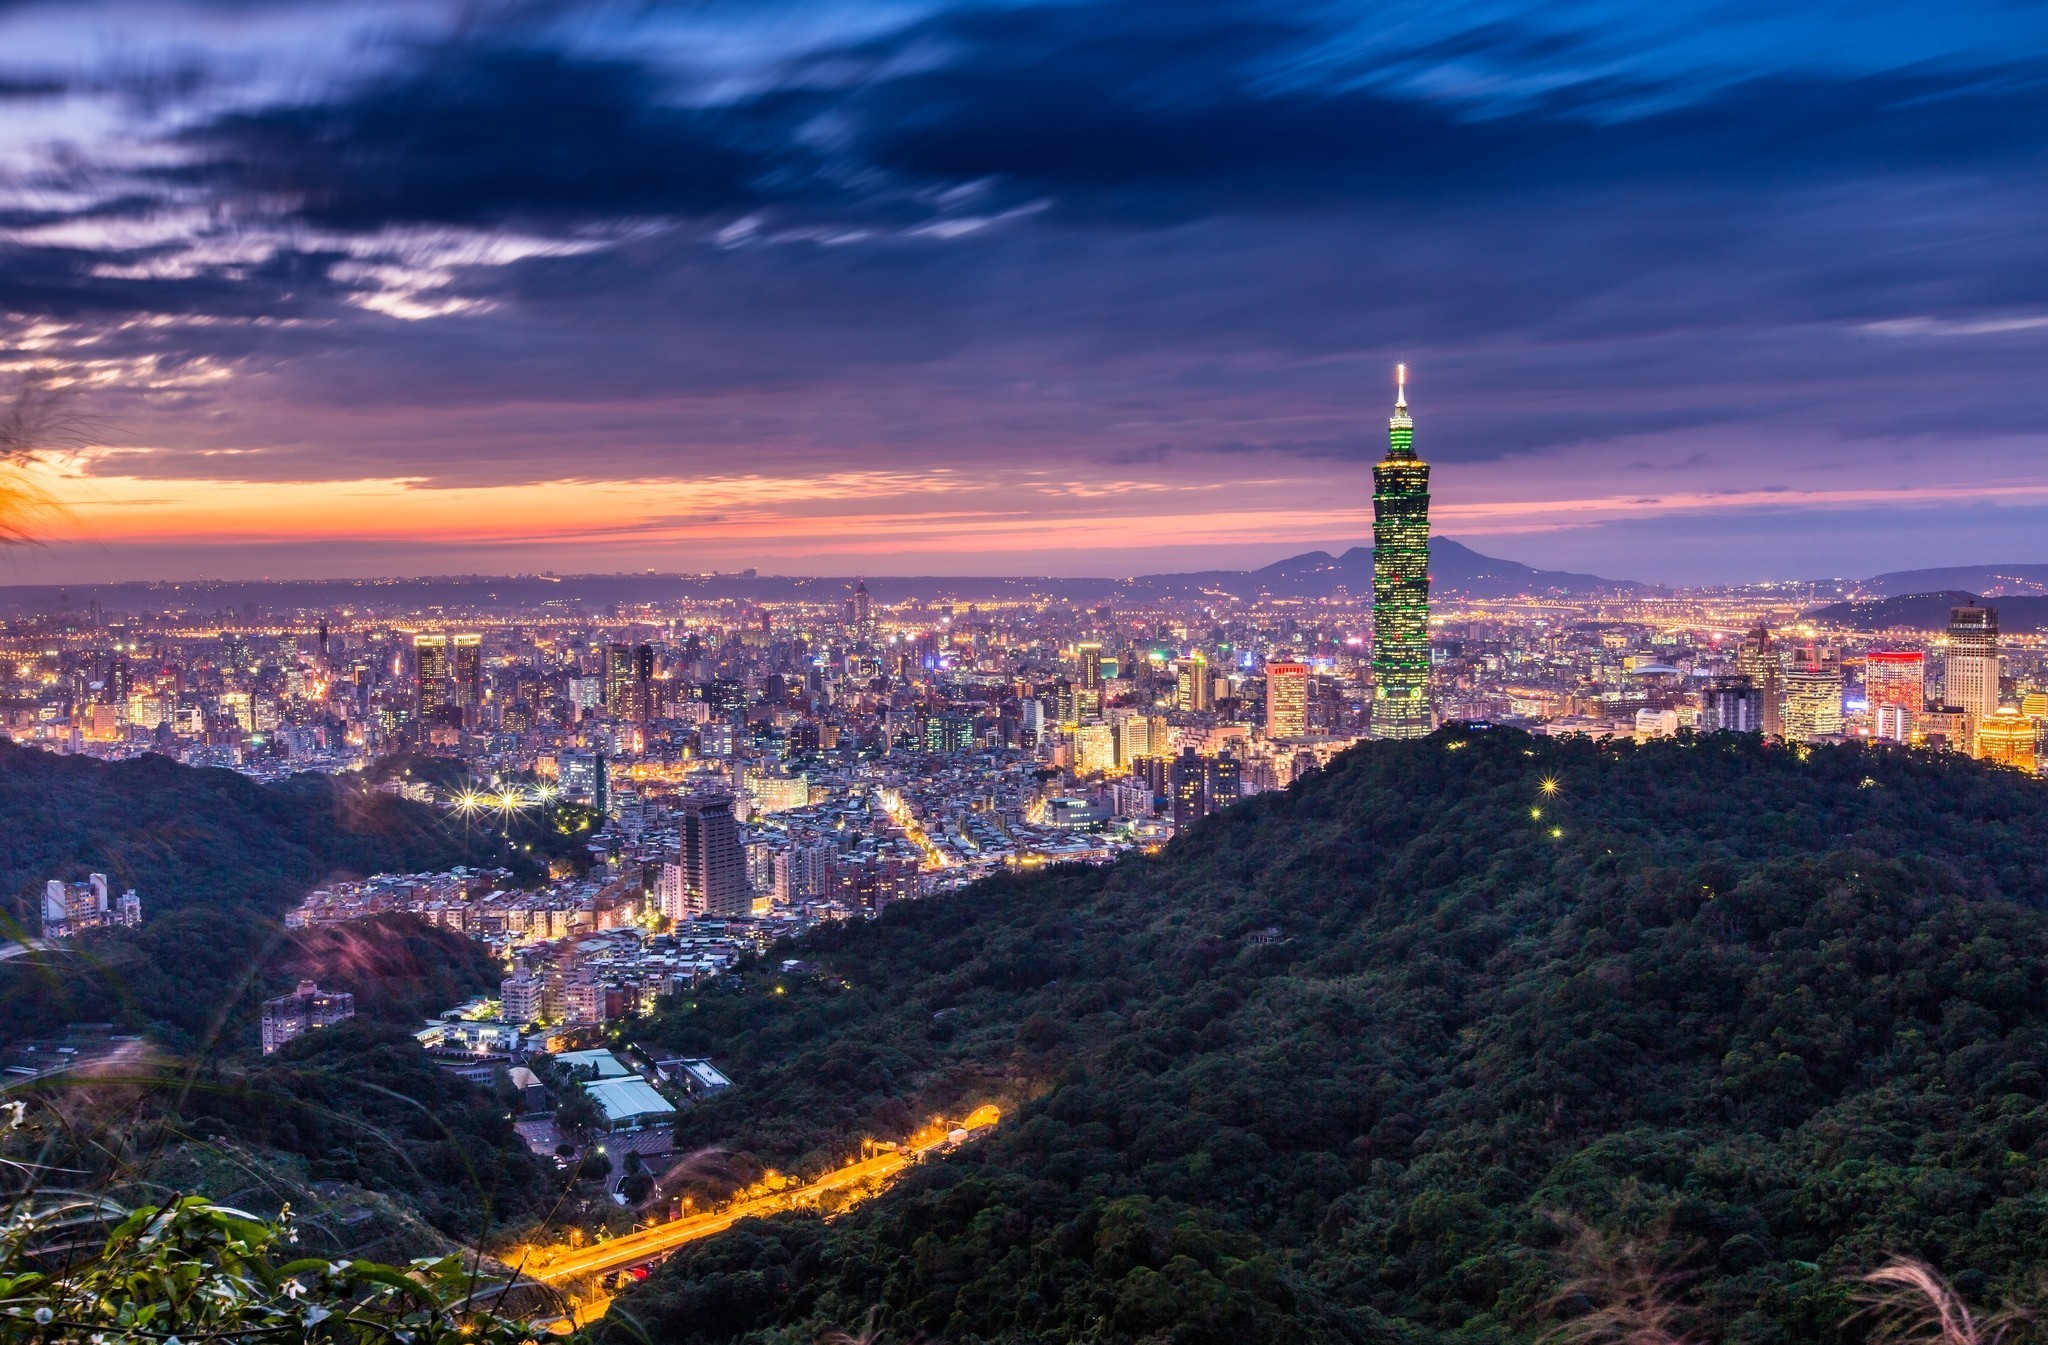 General 2048x1345 city cityscape Taipei 101 building lights HDR Asia city lights